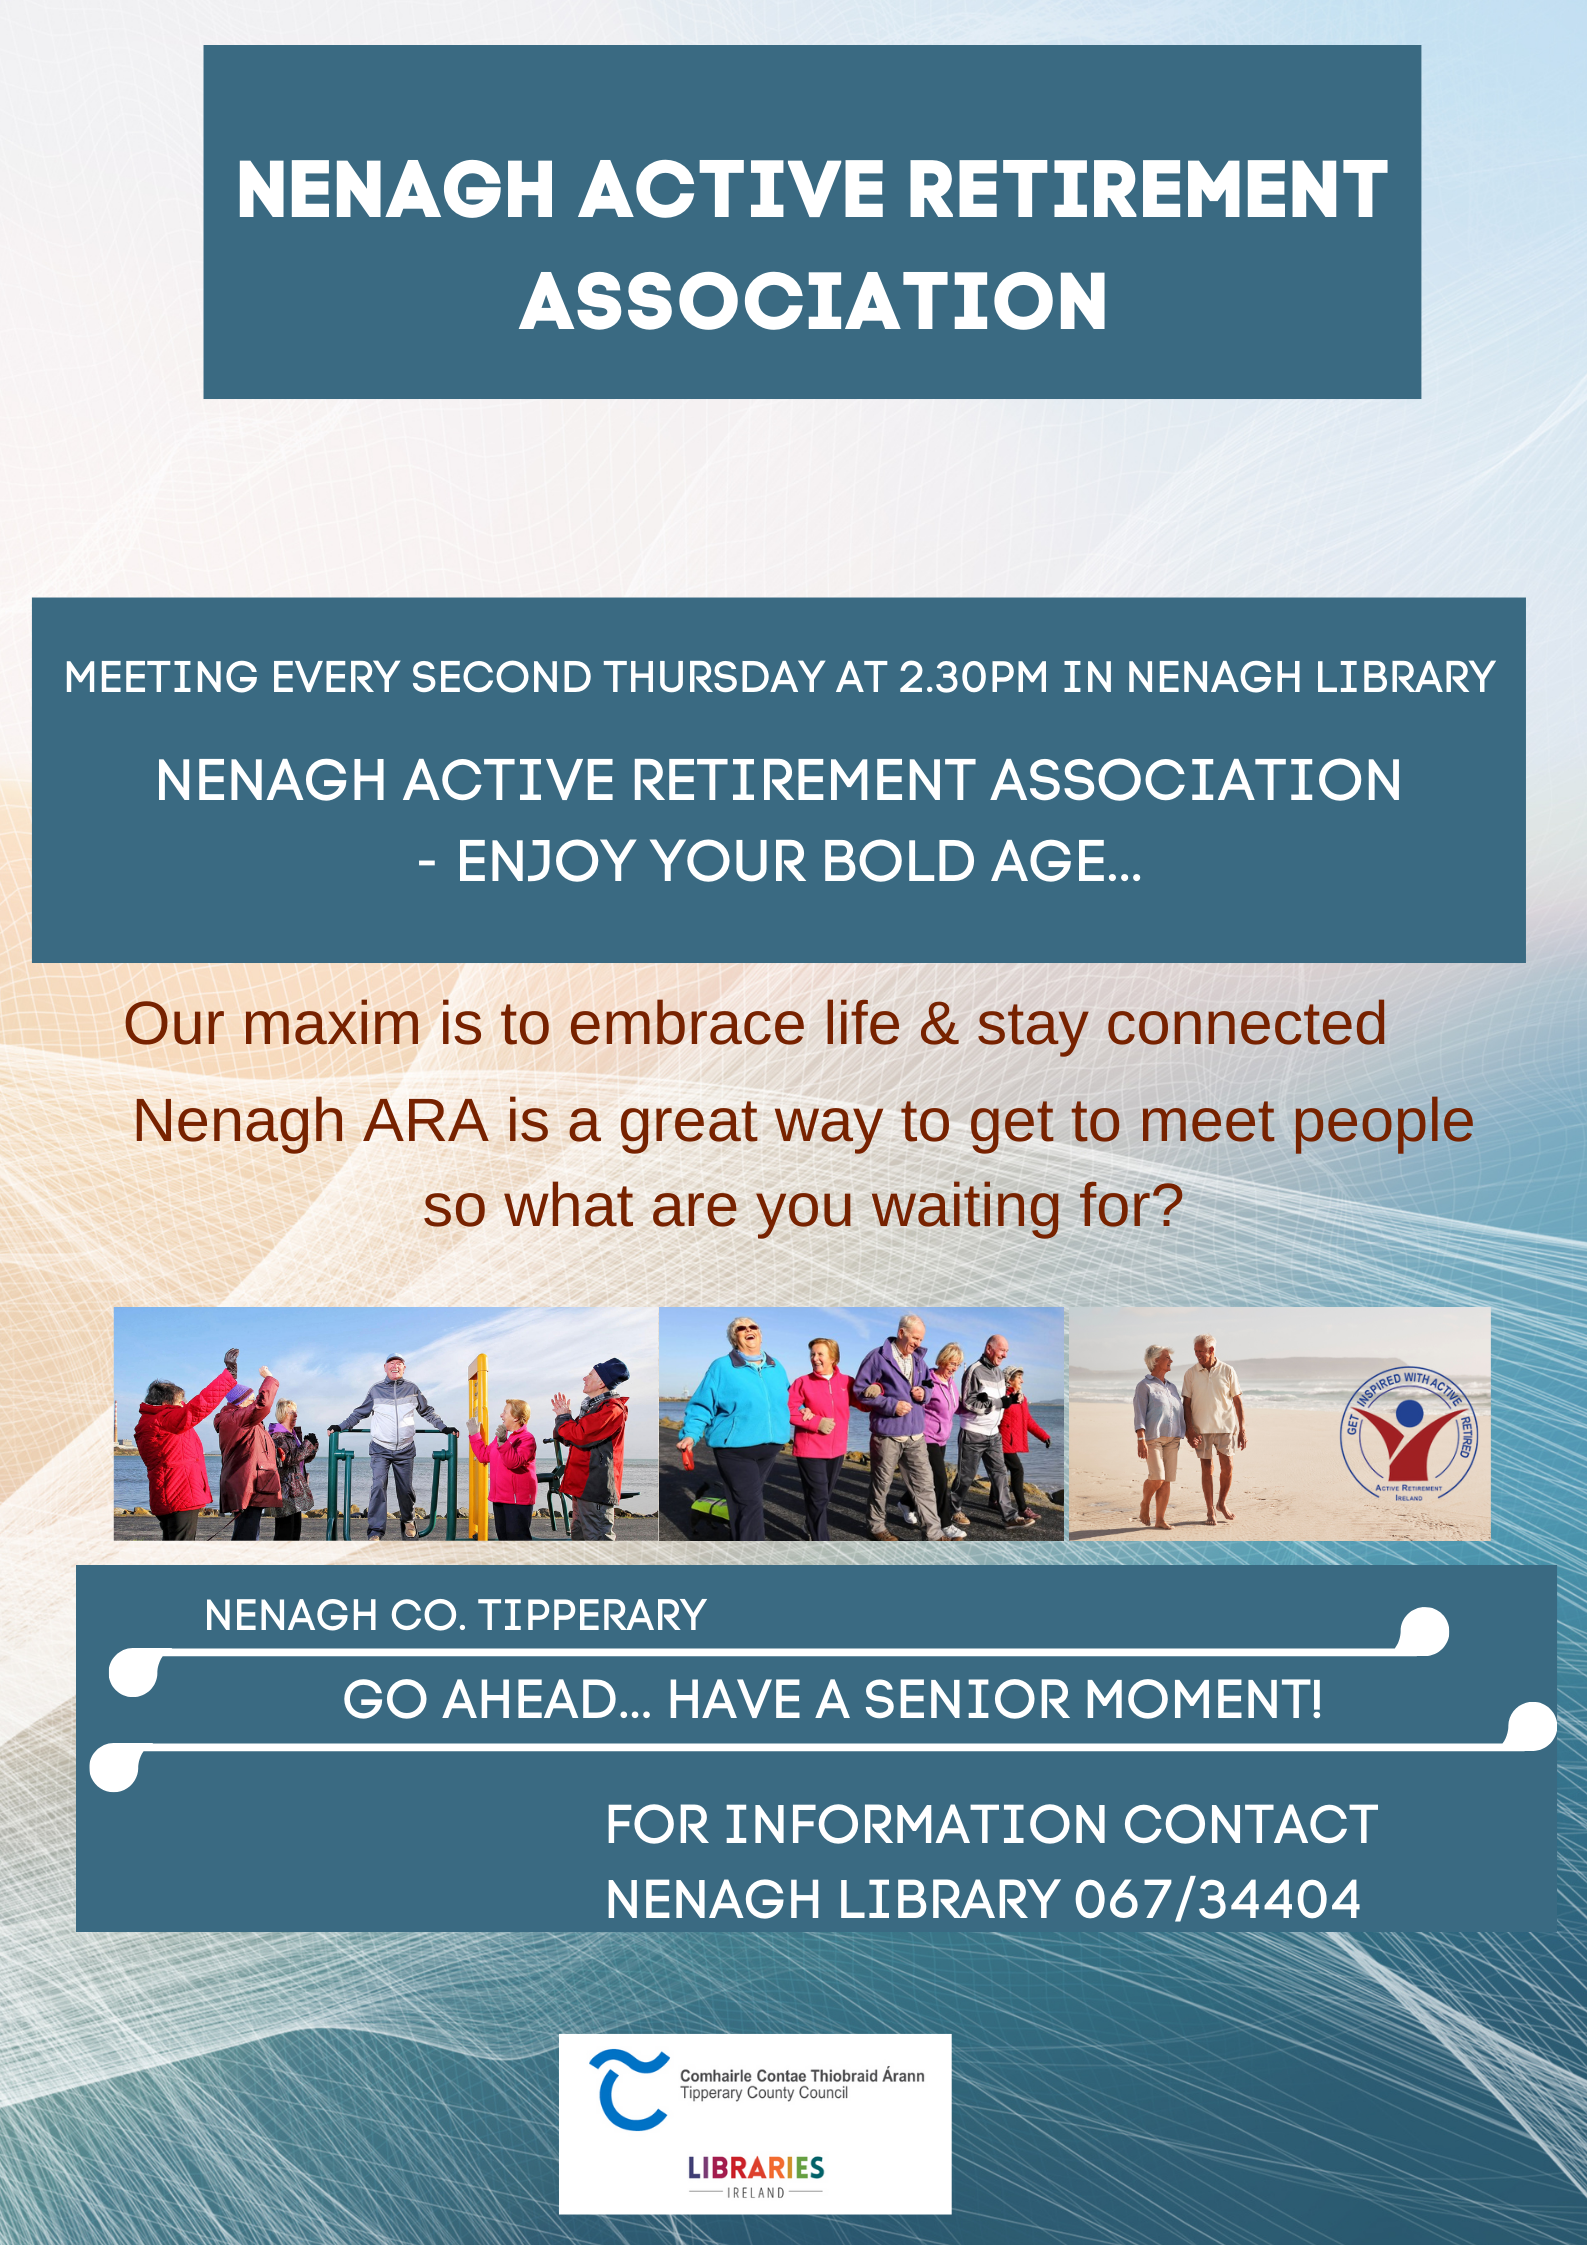 Nenagh Active Retirement Association is back every second Thursday in Nenagh Library